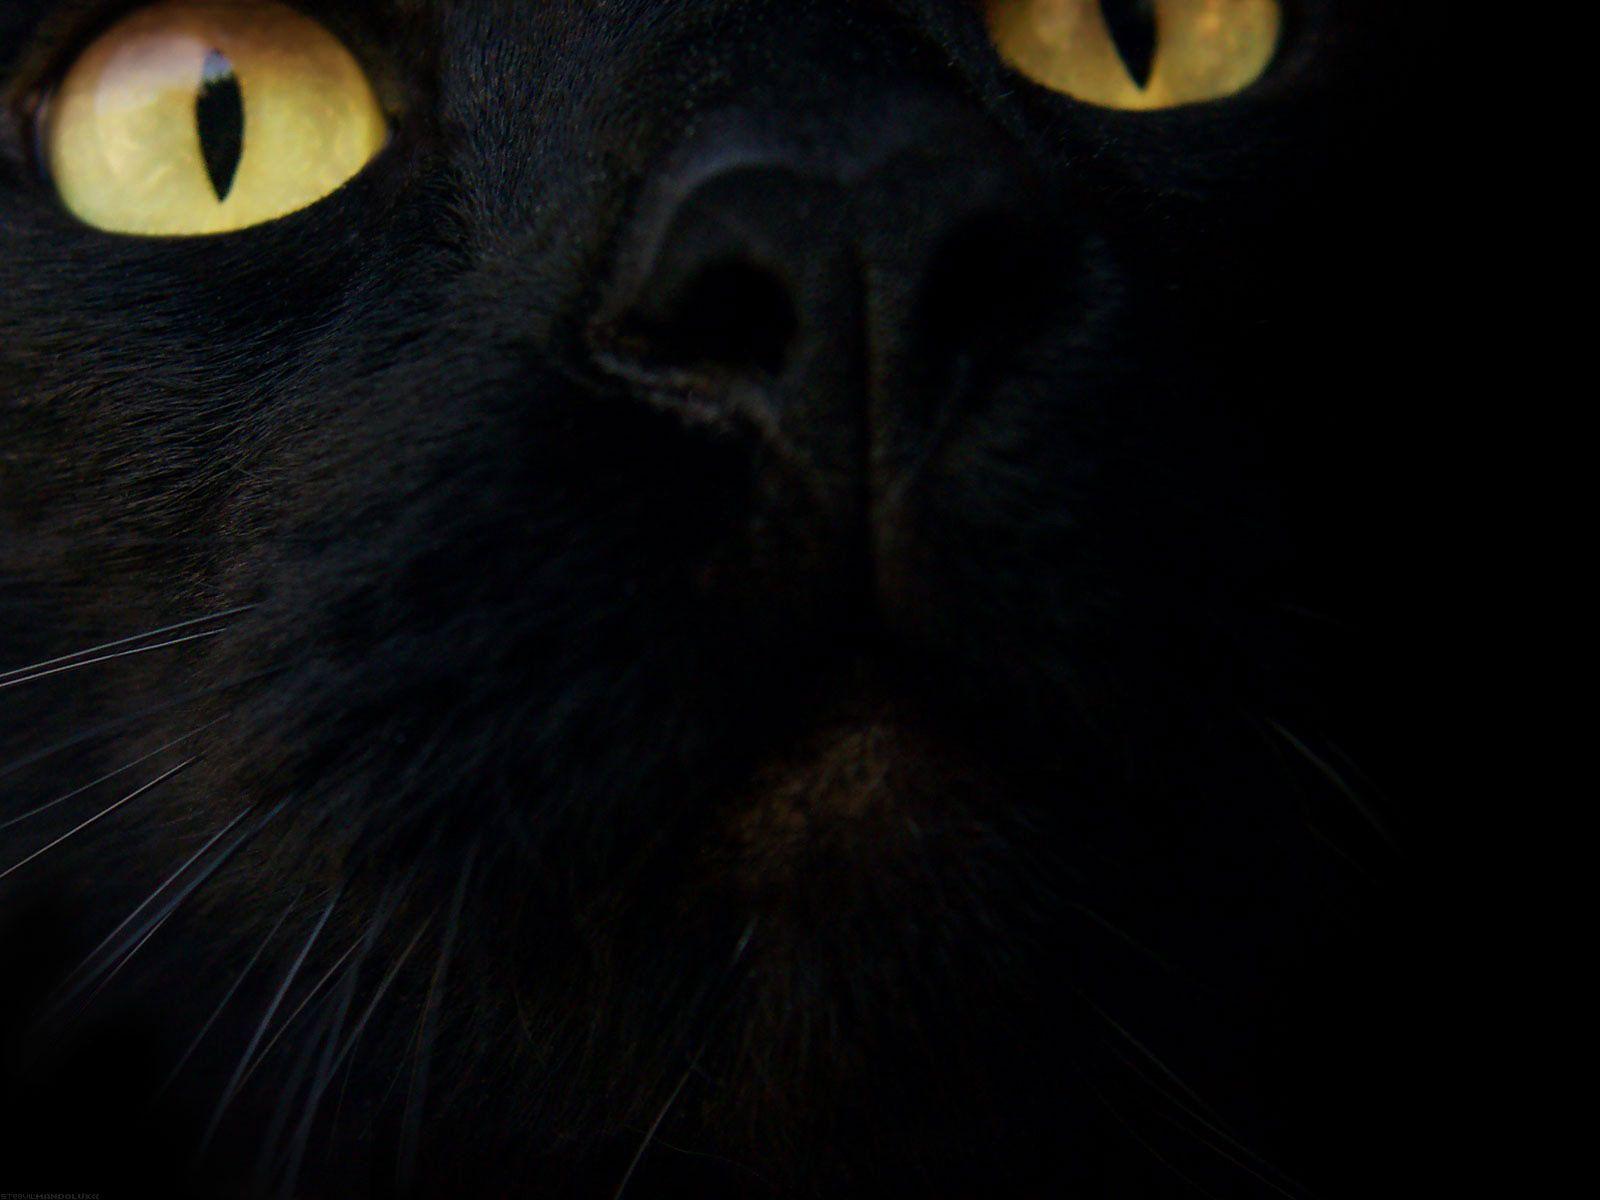 Black cat. ^.^THE INTUITIVE CAT WHAT DO YOU THINK OF THAT